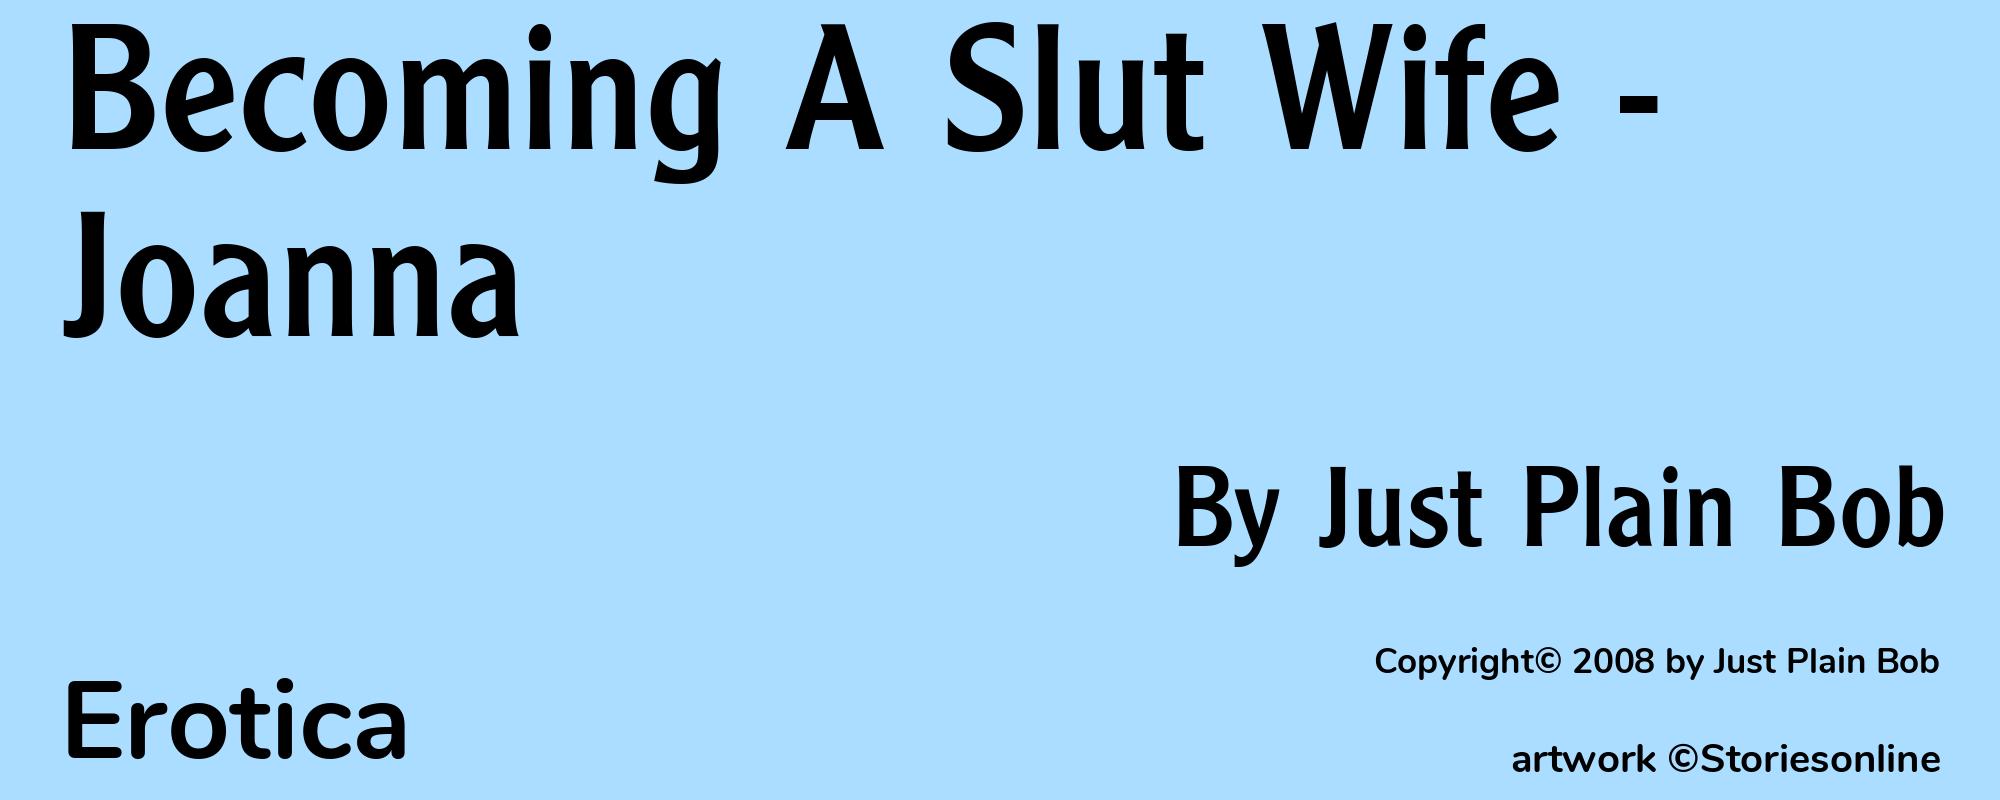 Becoming A Slut Wife - Joanna - Cover